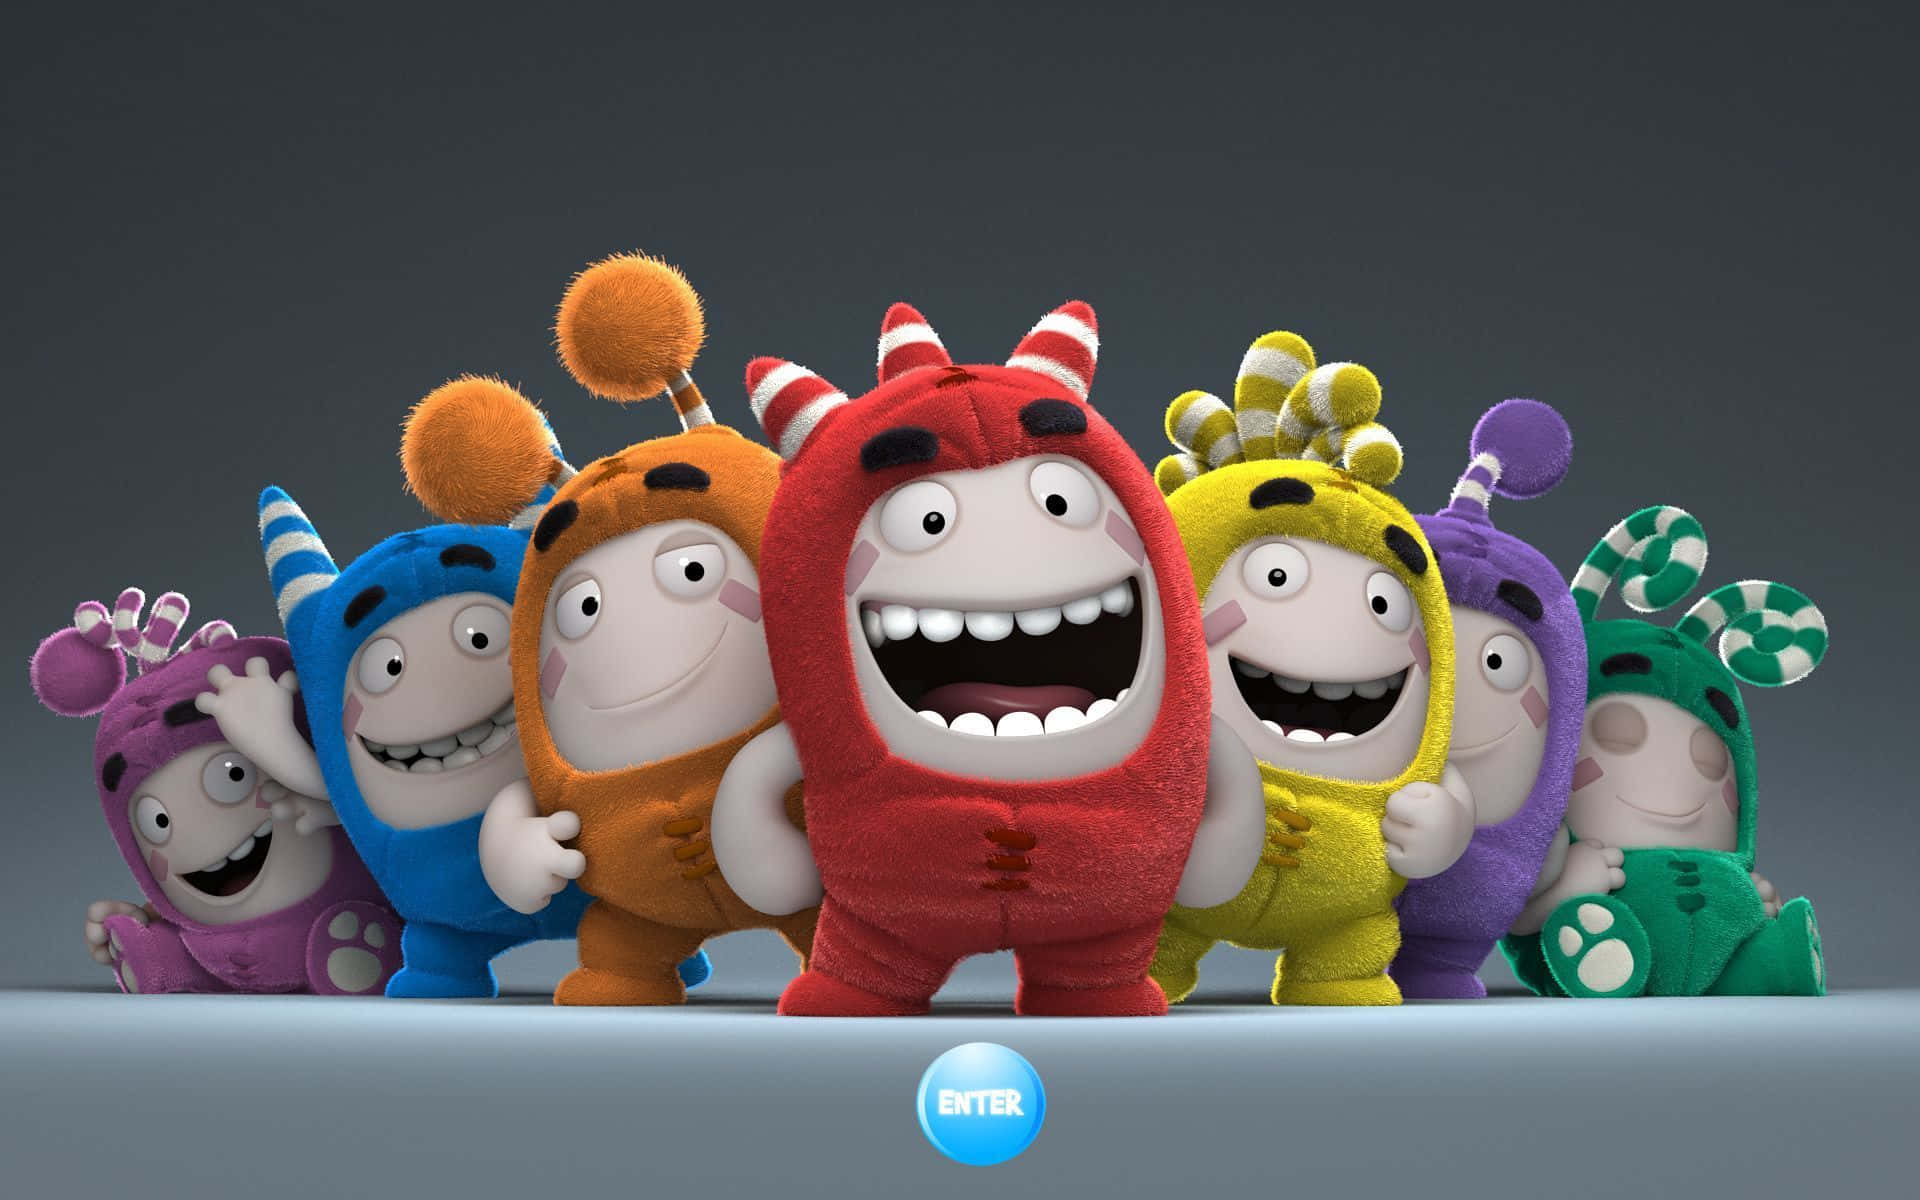 "Brighten your day with Oddbods!" Wallpaper